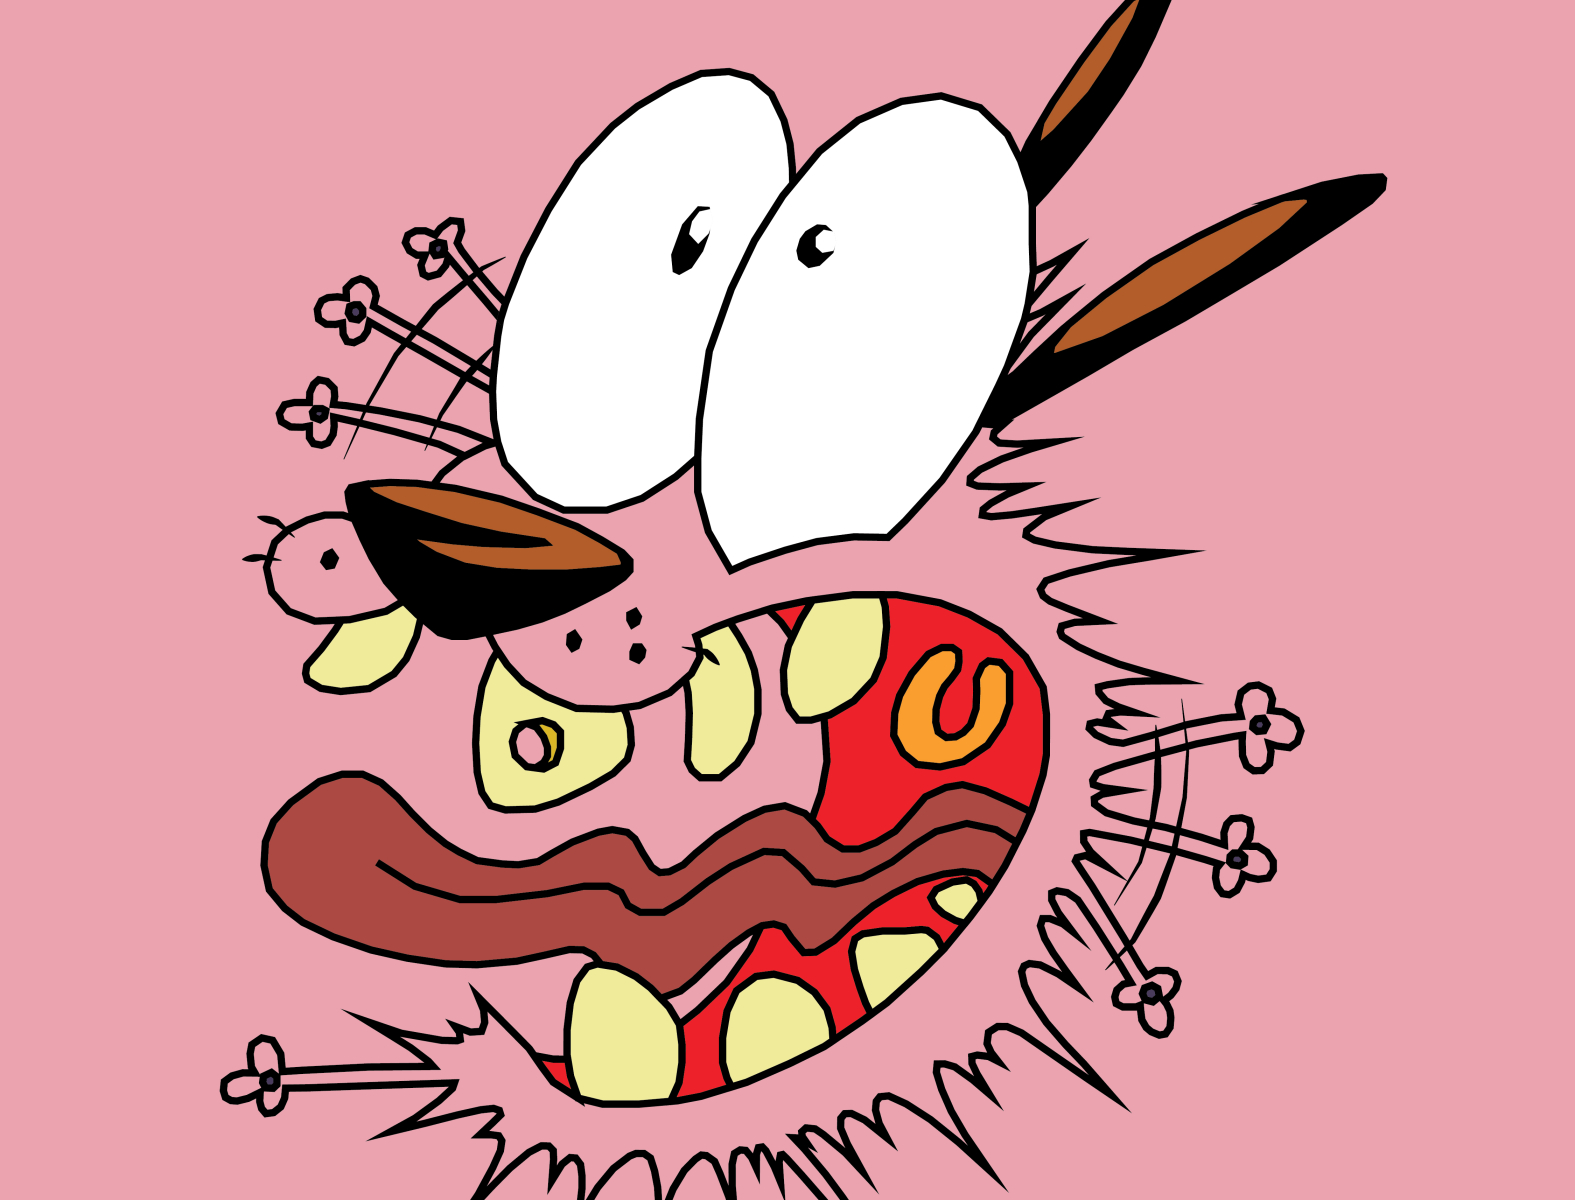 1. Courage the Cowardly Dog - wide 6